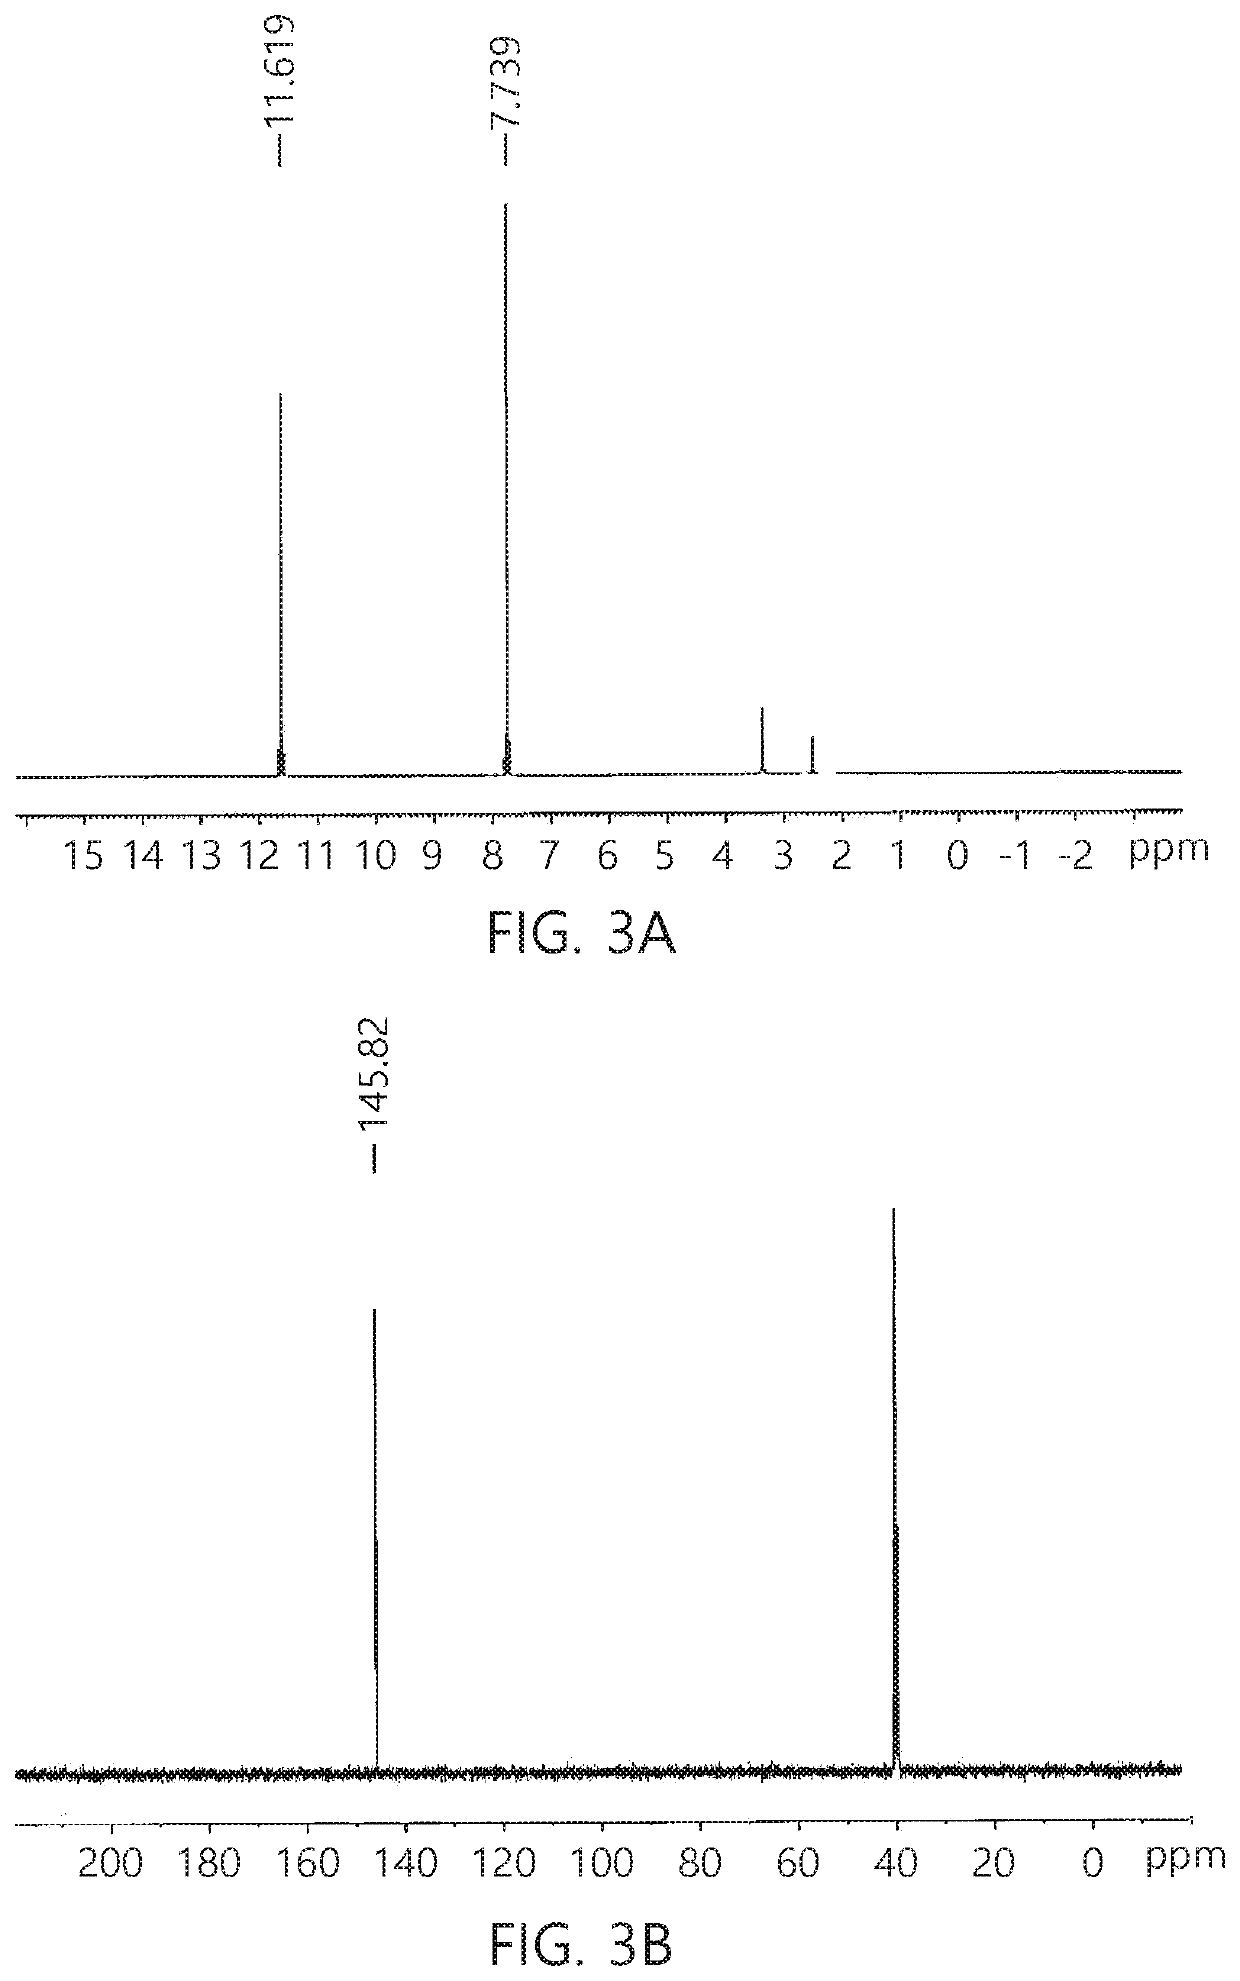 Method for synthesis of TKX-50 using insensitive intermediate